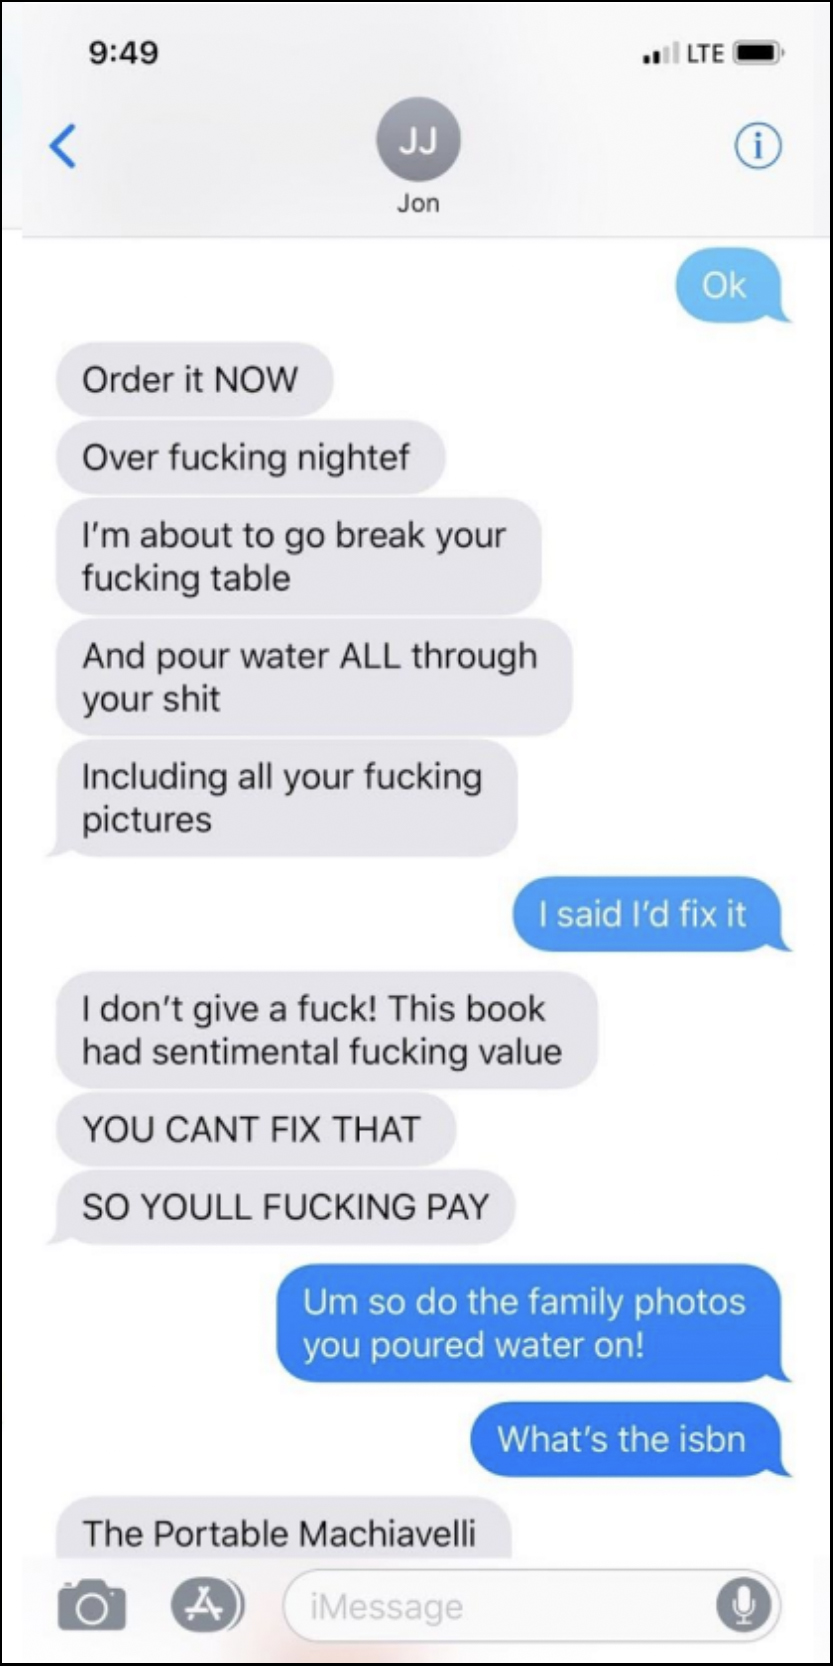 The image displays a heated text conversation where Jon Jacobo threatens to damage property and the other offers to fix it, ending with a book title.